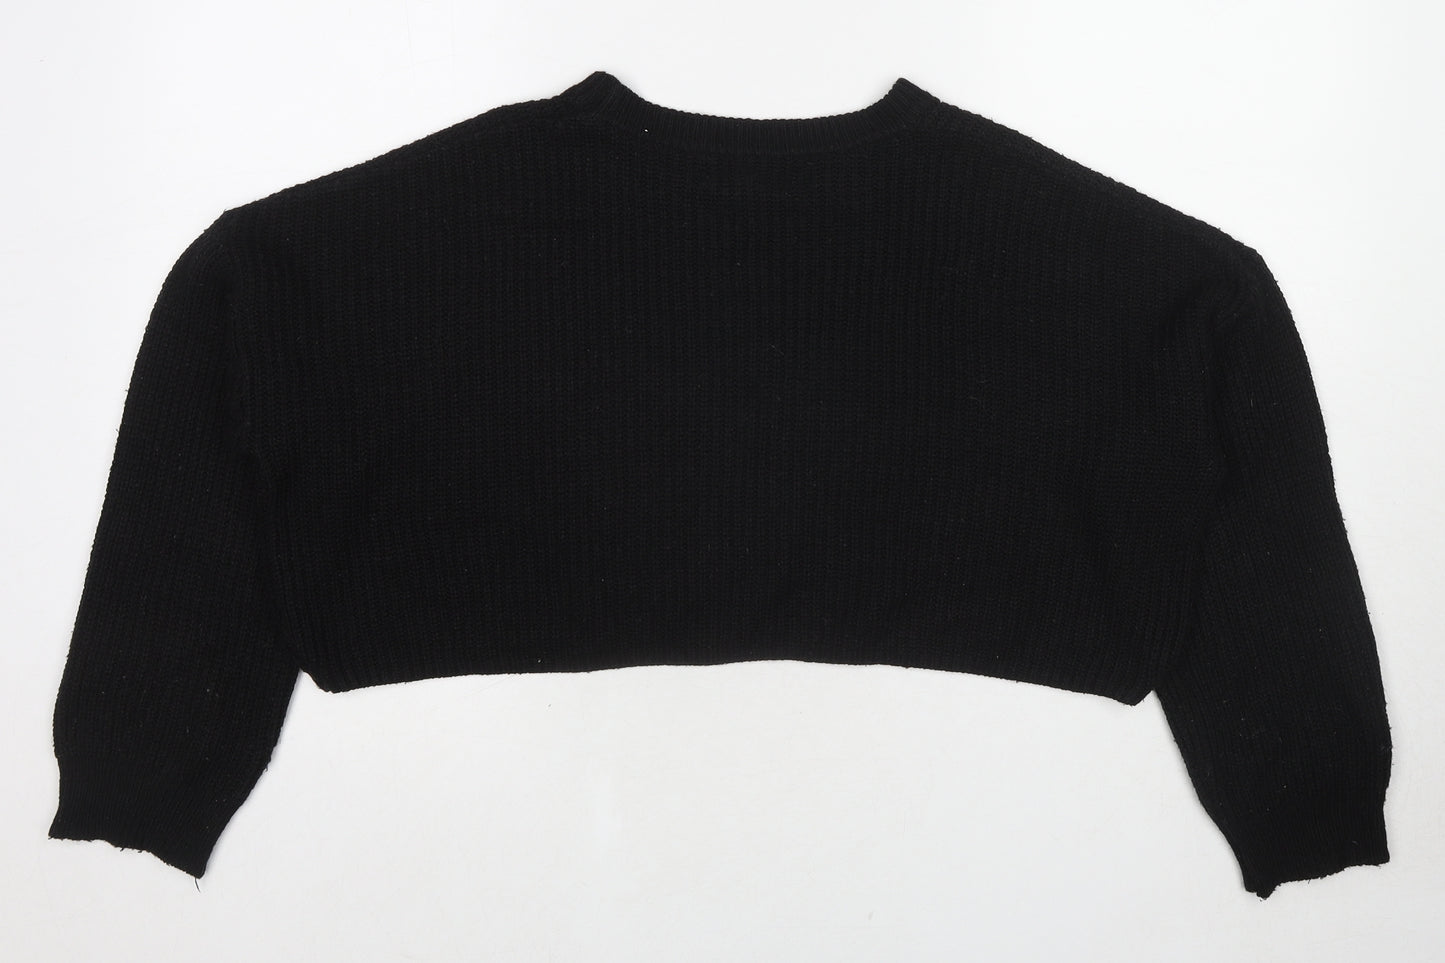 Missguided Womens Black Round Neck Polyester Pullover Jumper Size S - Size S-M Cropped